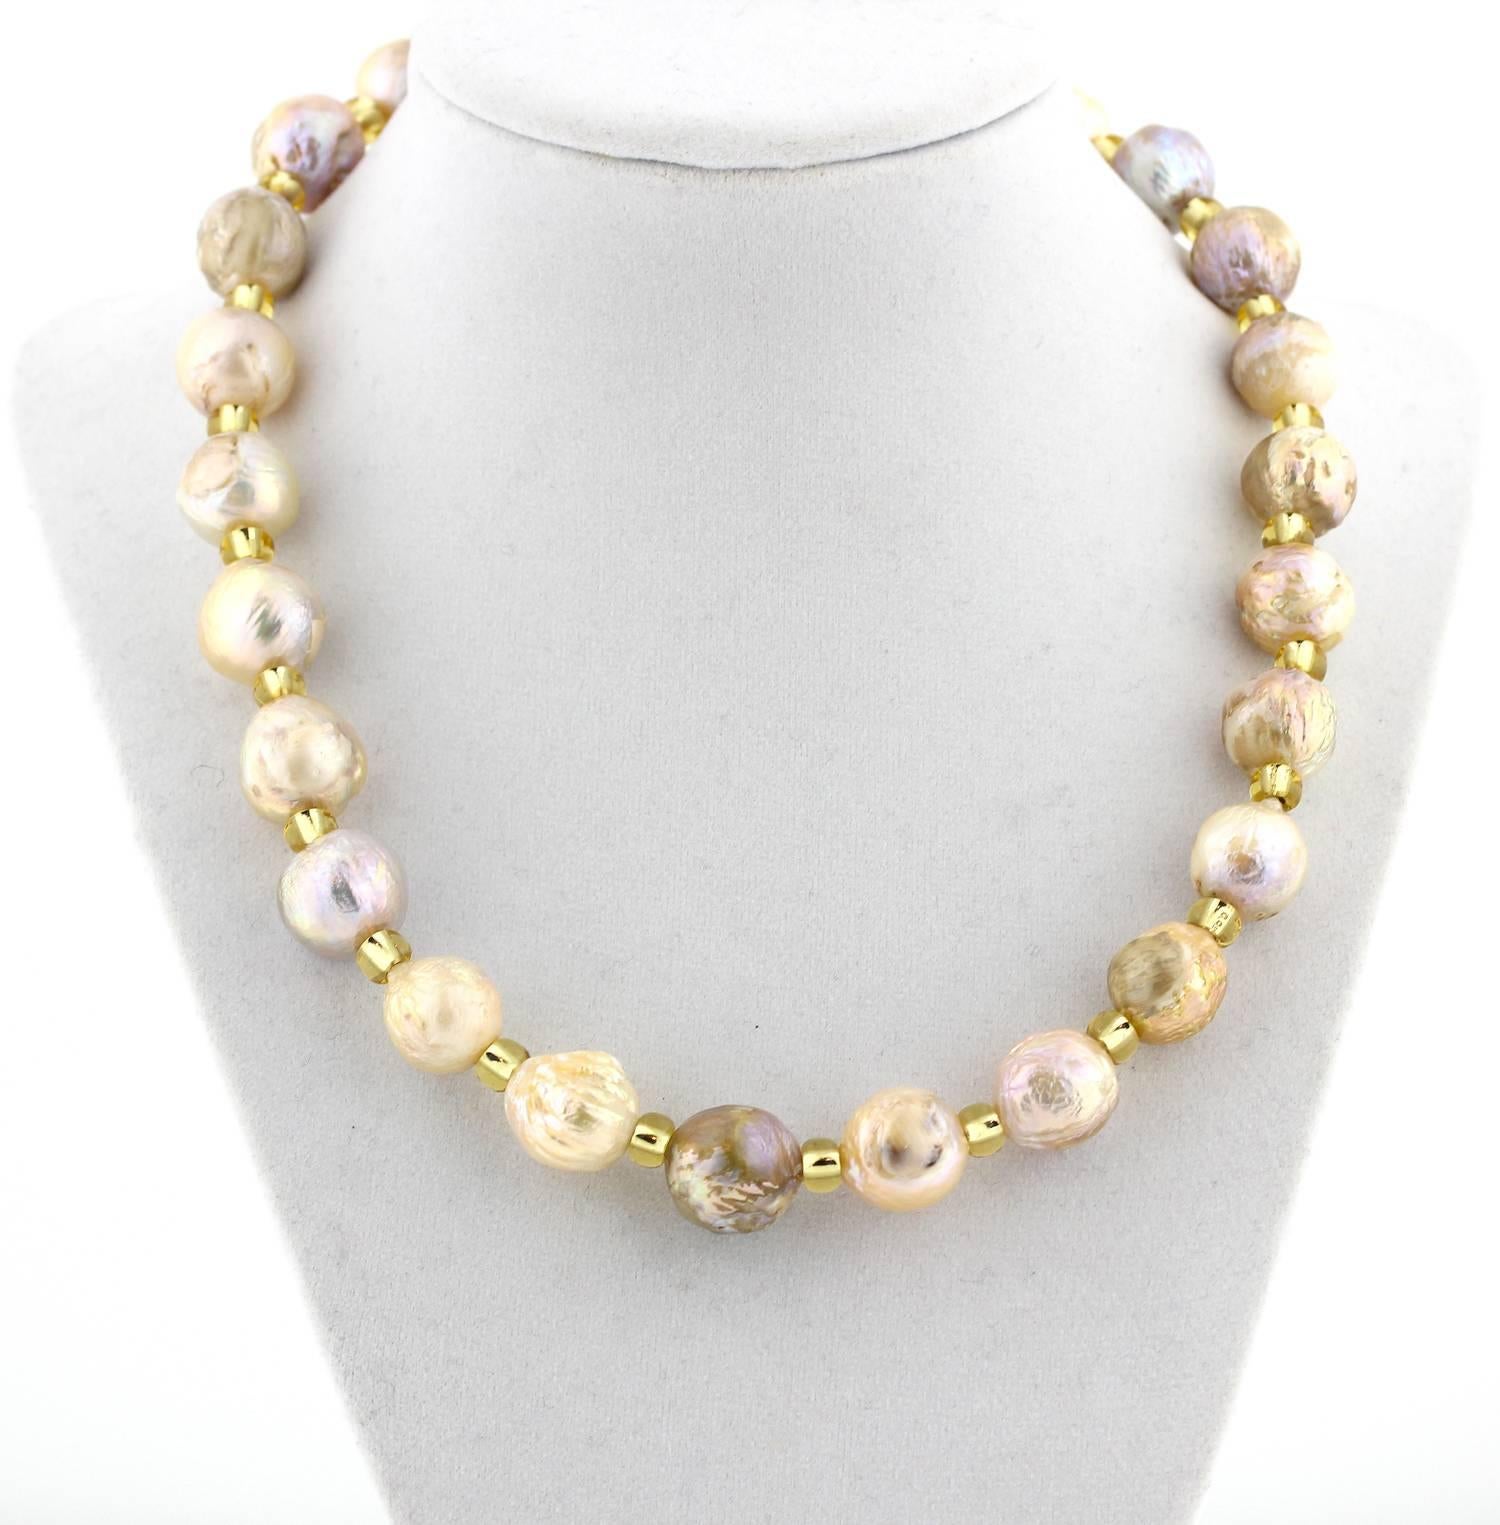 All of the unique natural nacre from the shells of the Ocean give these fun Pearls with all of their rough intense beauty an extraordinary glistening look - enhanced with sparkling gold tone crystals on this handmade necklace..  Size:  slightly